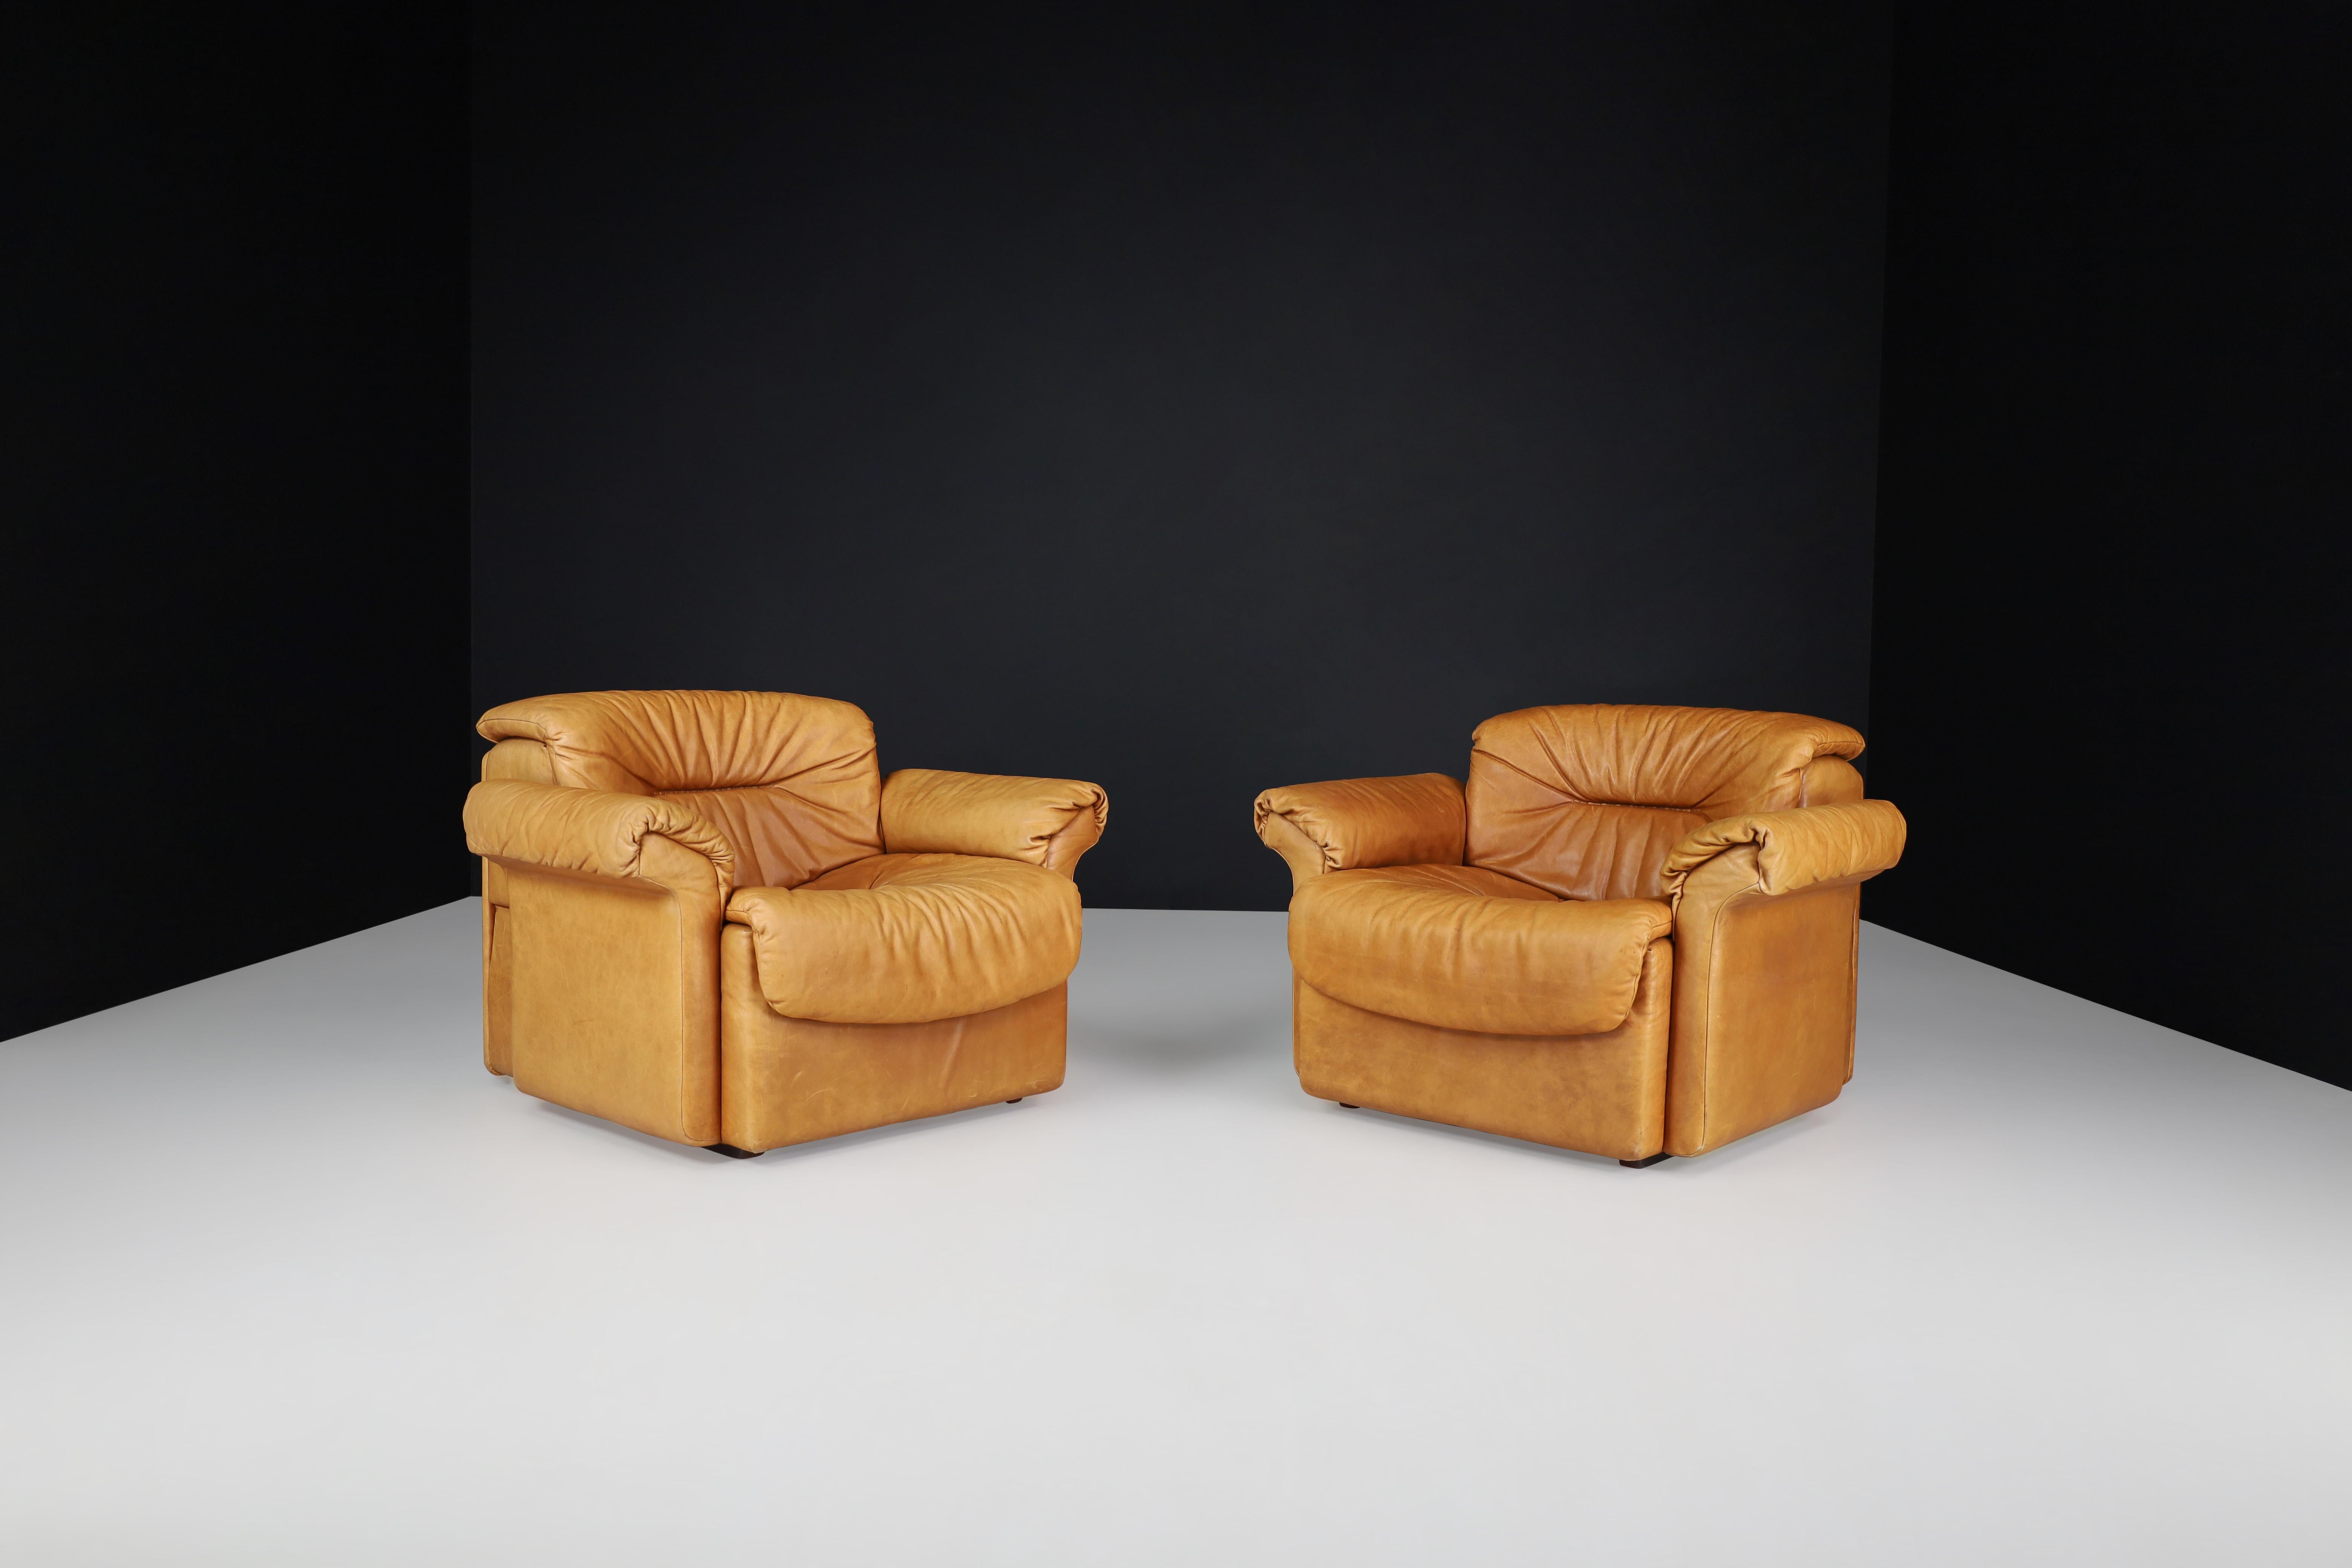 De Sede DS 14 lounge chairs in patinated cognac leather, Switzerland 1970s

These robust patinated De Sede lounge chairs ensure ultimate comfort and building quality with their solid wooden frame and thick hand-stitched leather upholstery. Nice